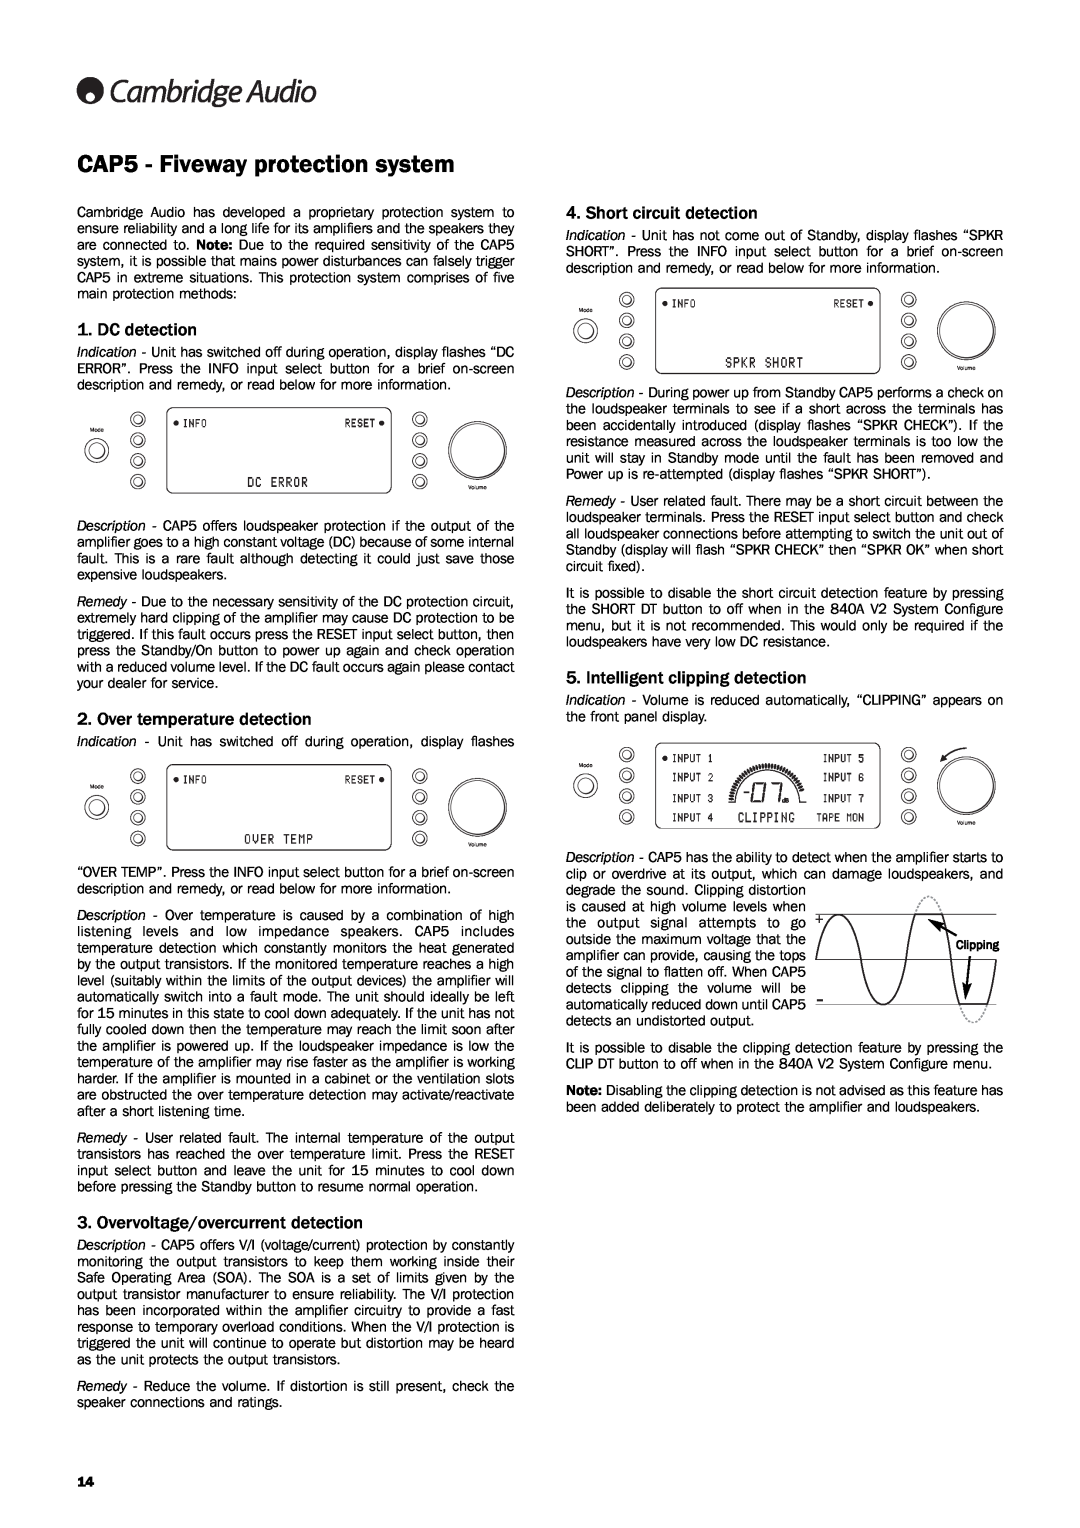 Cambridge Audio 840A V2 user manual CAP5 - Fiveway protection system, DC detection, Over temperature detection 